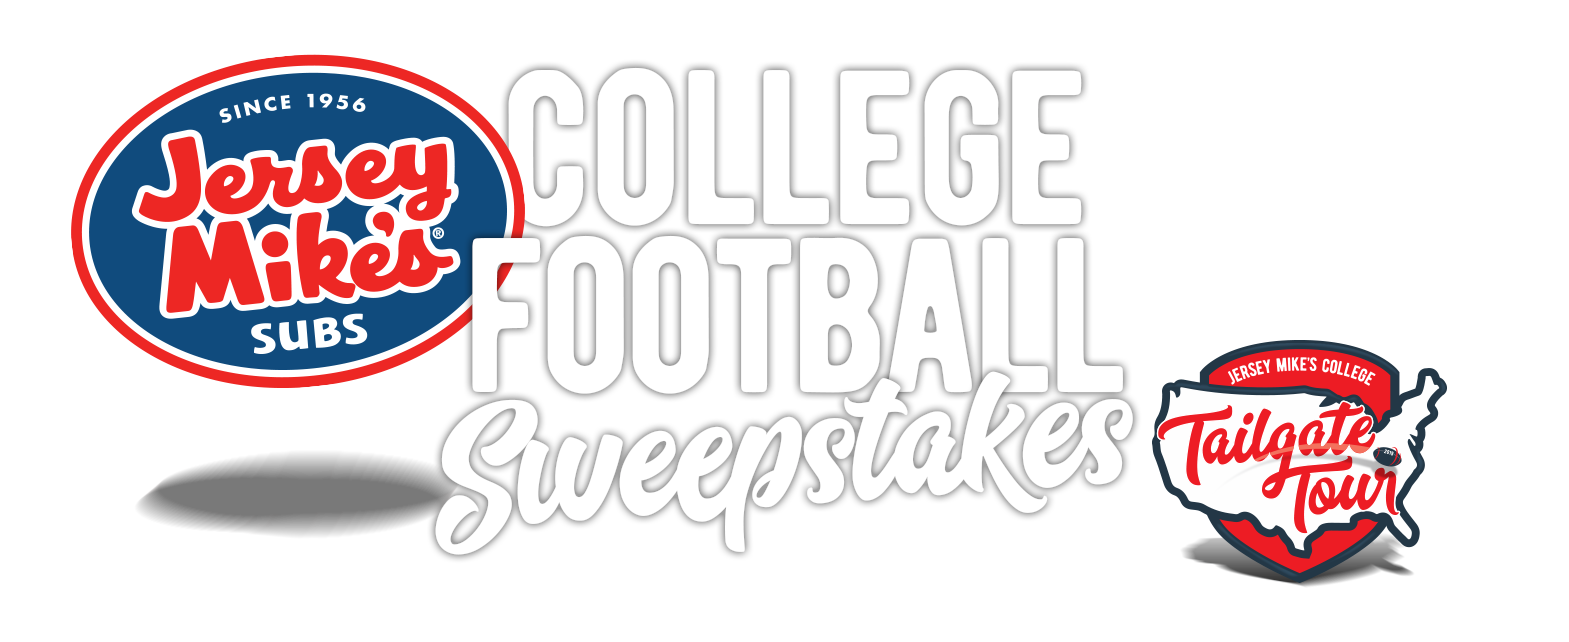 Jersey Mike’s: A Sub Above CFB Tailgate Sweepstakes!